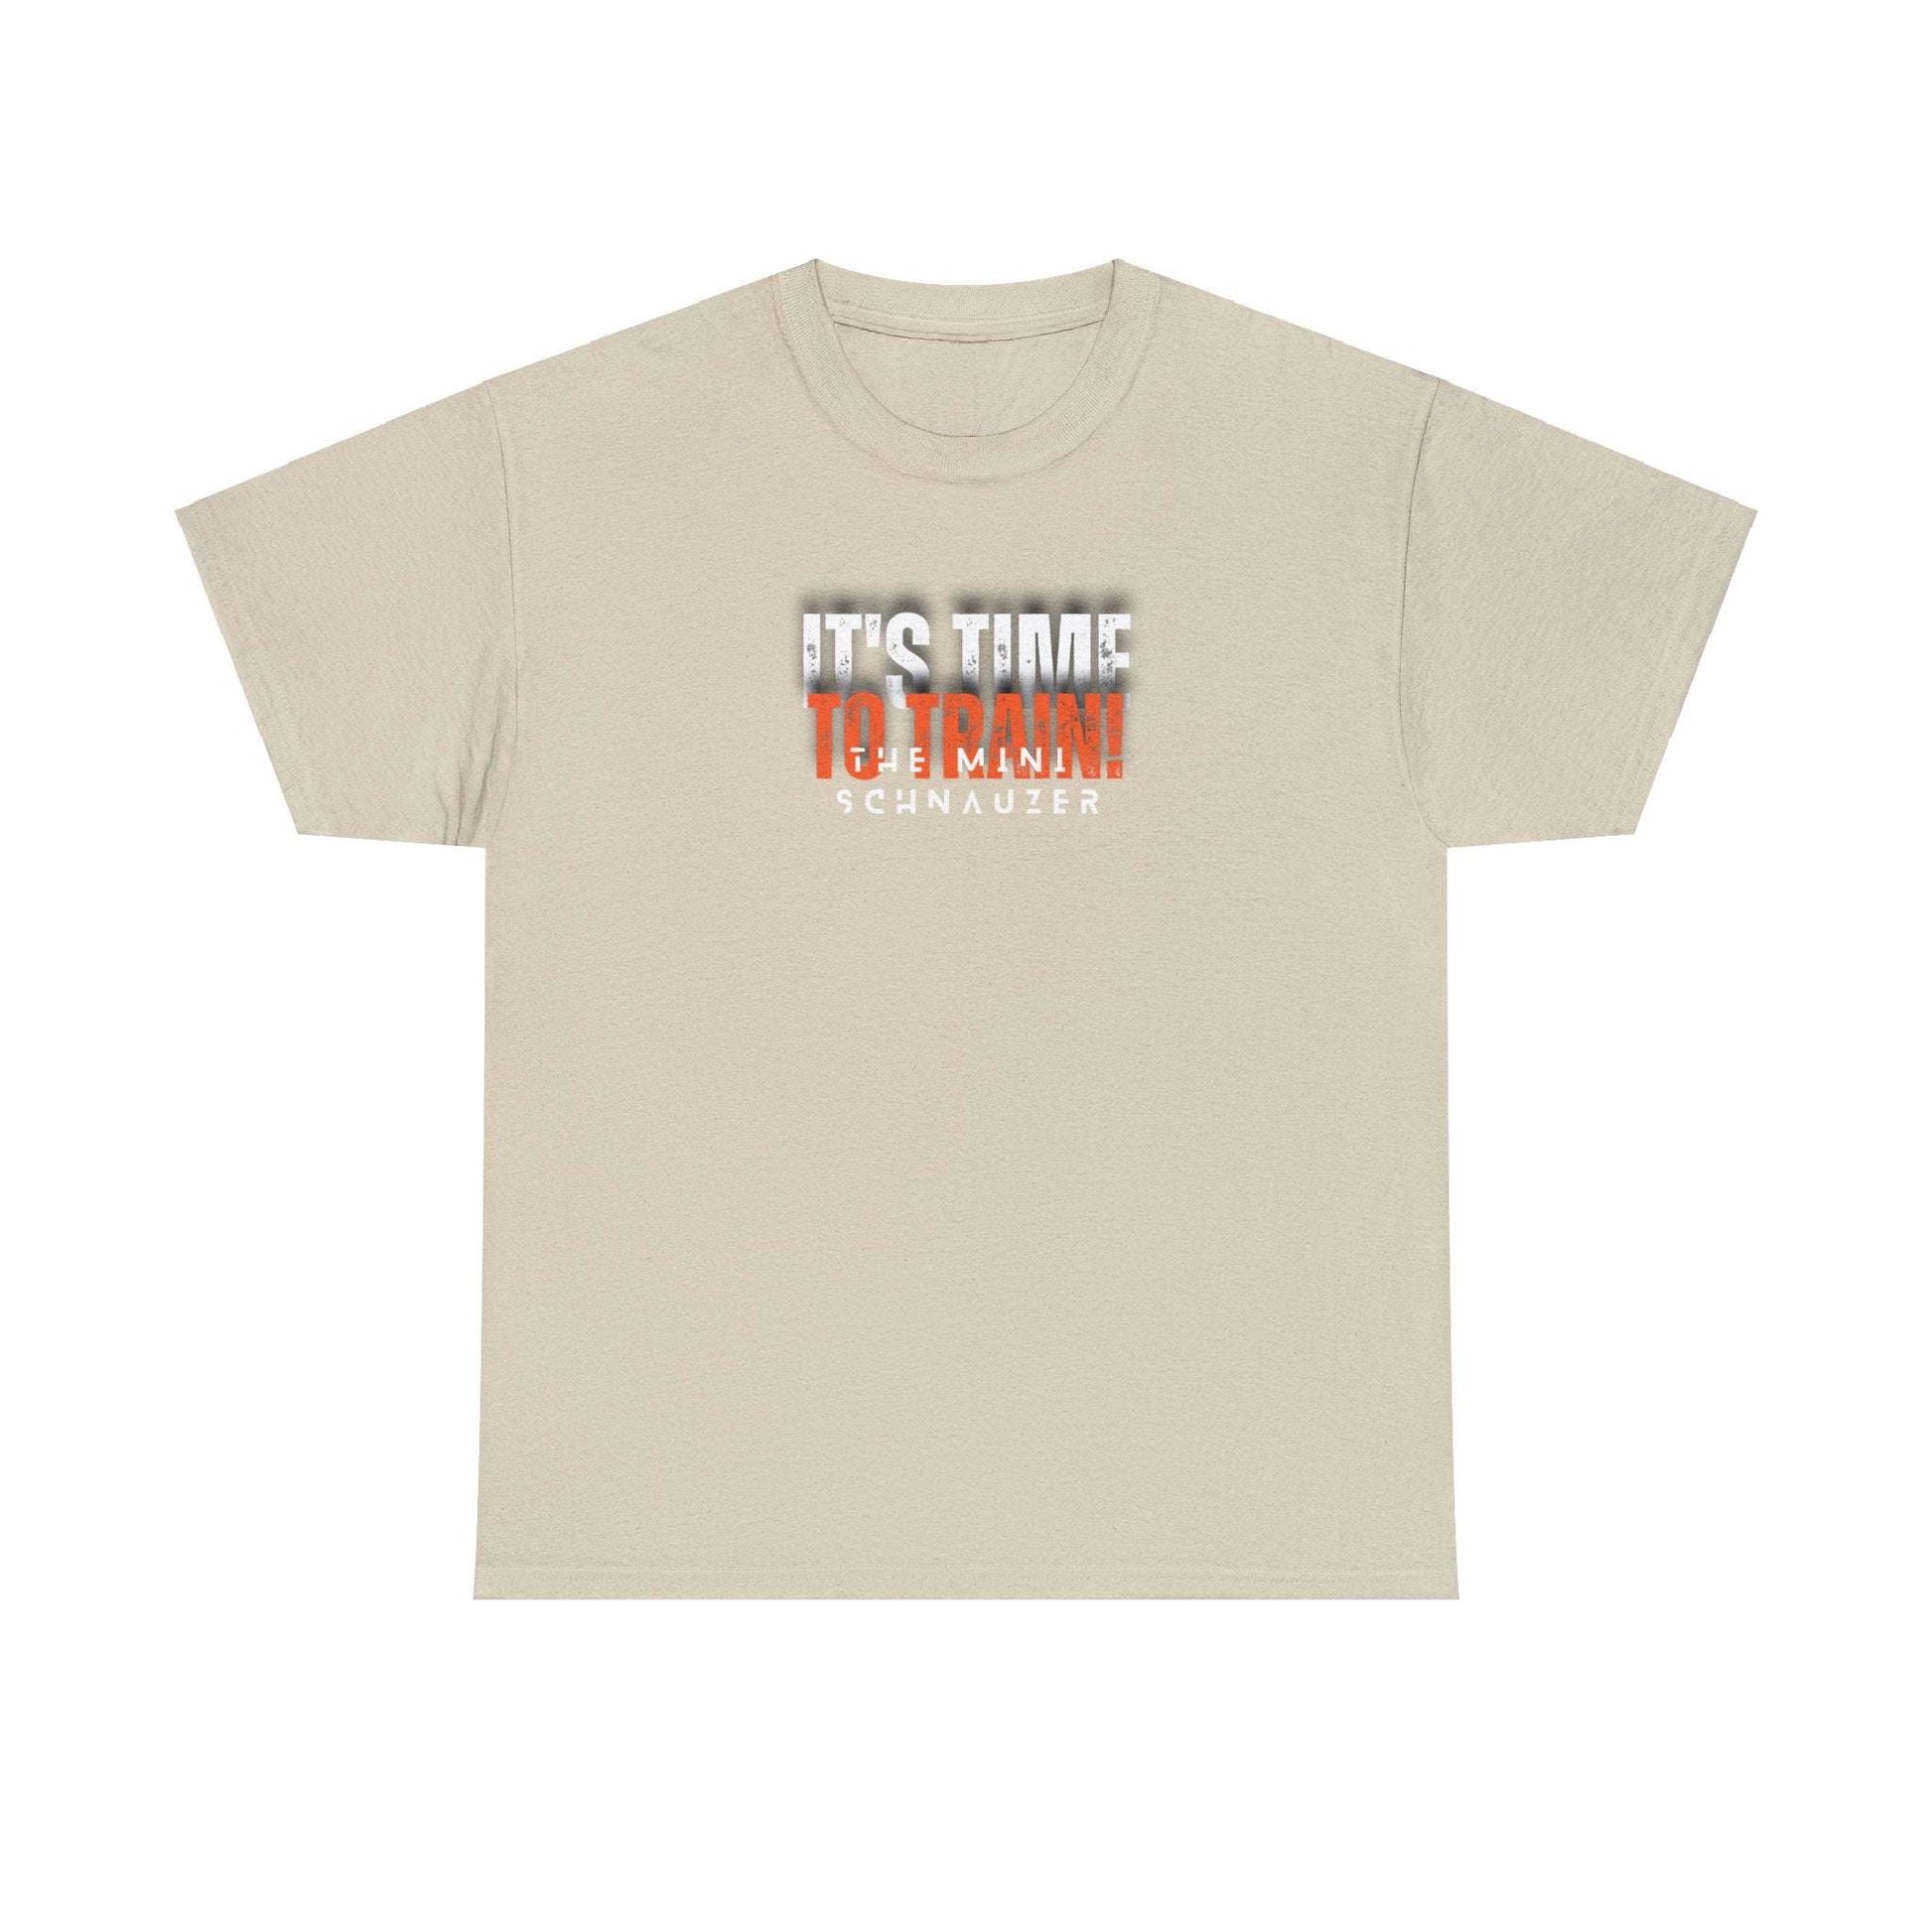 Fabulous Tee Shirts' 'Its Time To Train The Mini Schnauzer' tan t-shirt displayed to emphasize its unique design and premium quality.